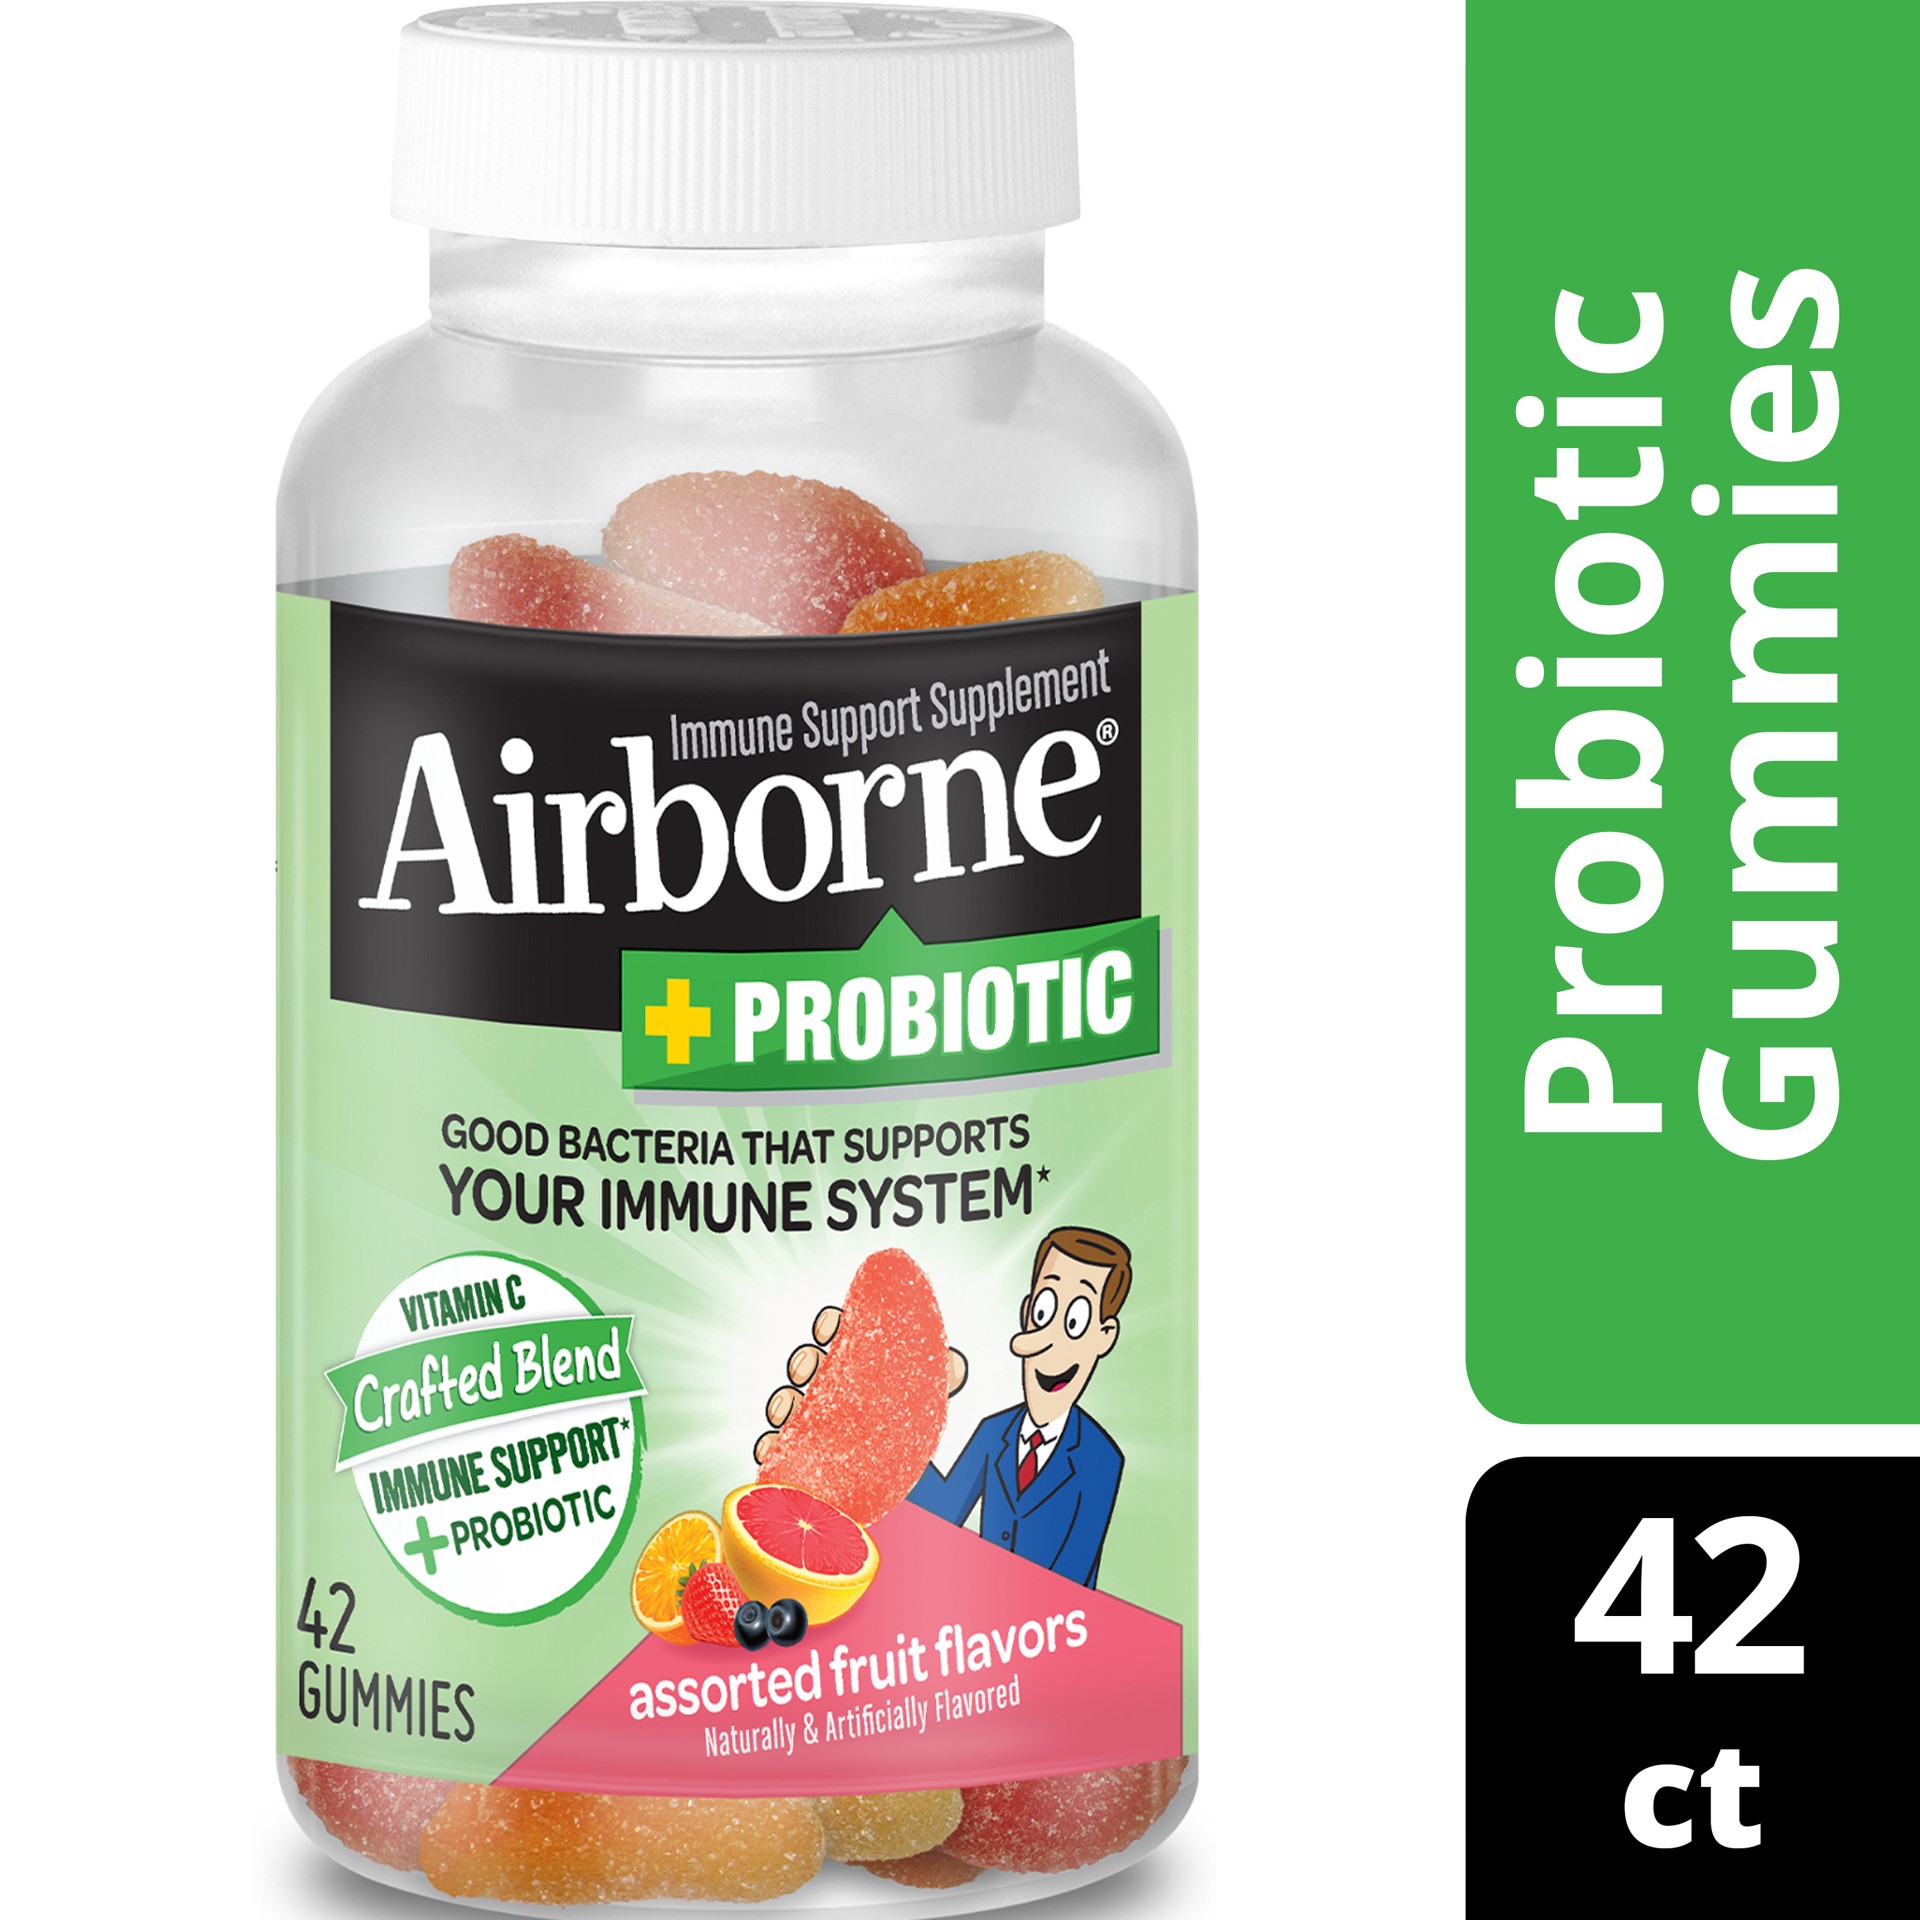 slide 1 of 7, Airborne Plus Probiotic Gummies, 42 count - 750mg of Vitamin C - Immune Support Supplement (Packaging May Vary), 42 ct